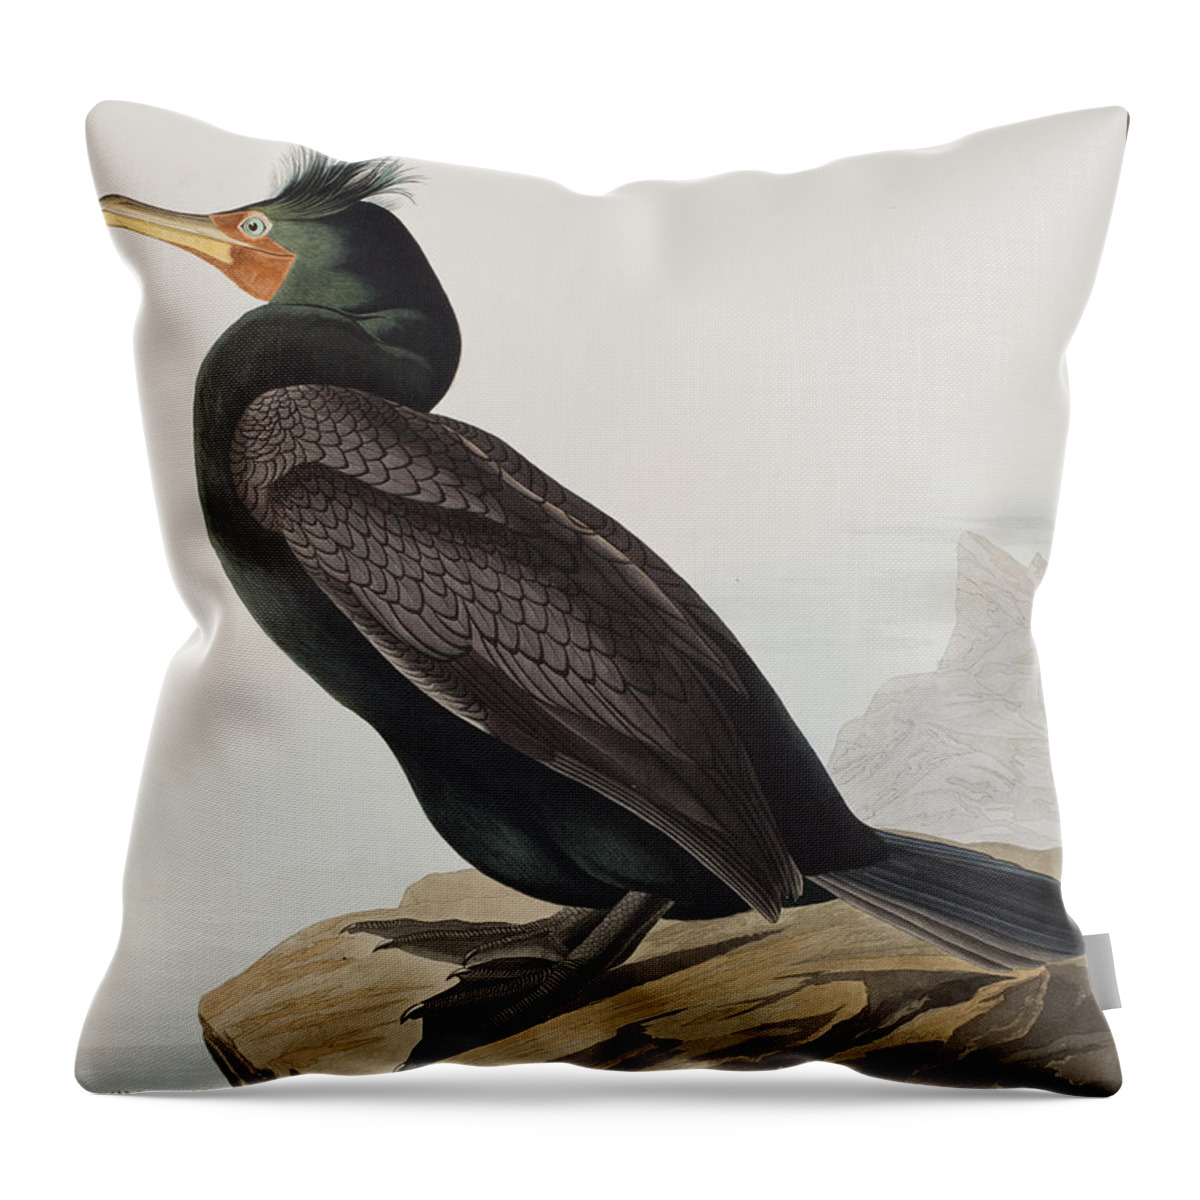 Cormorant Throw Pillow featuring the painting Double-crested Cormorant by John James Audubon